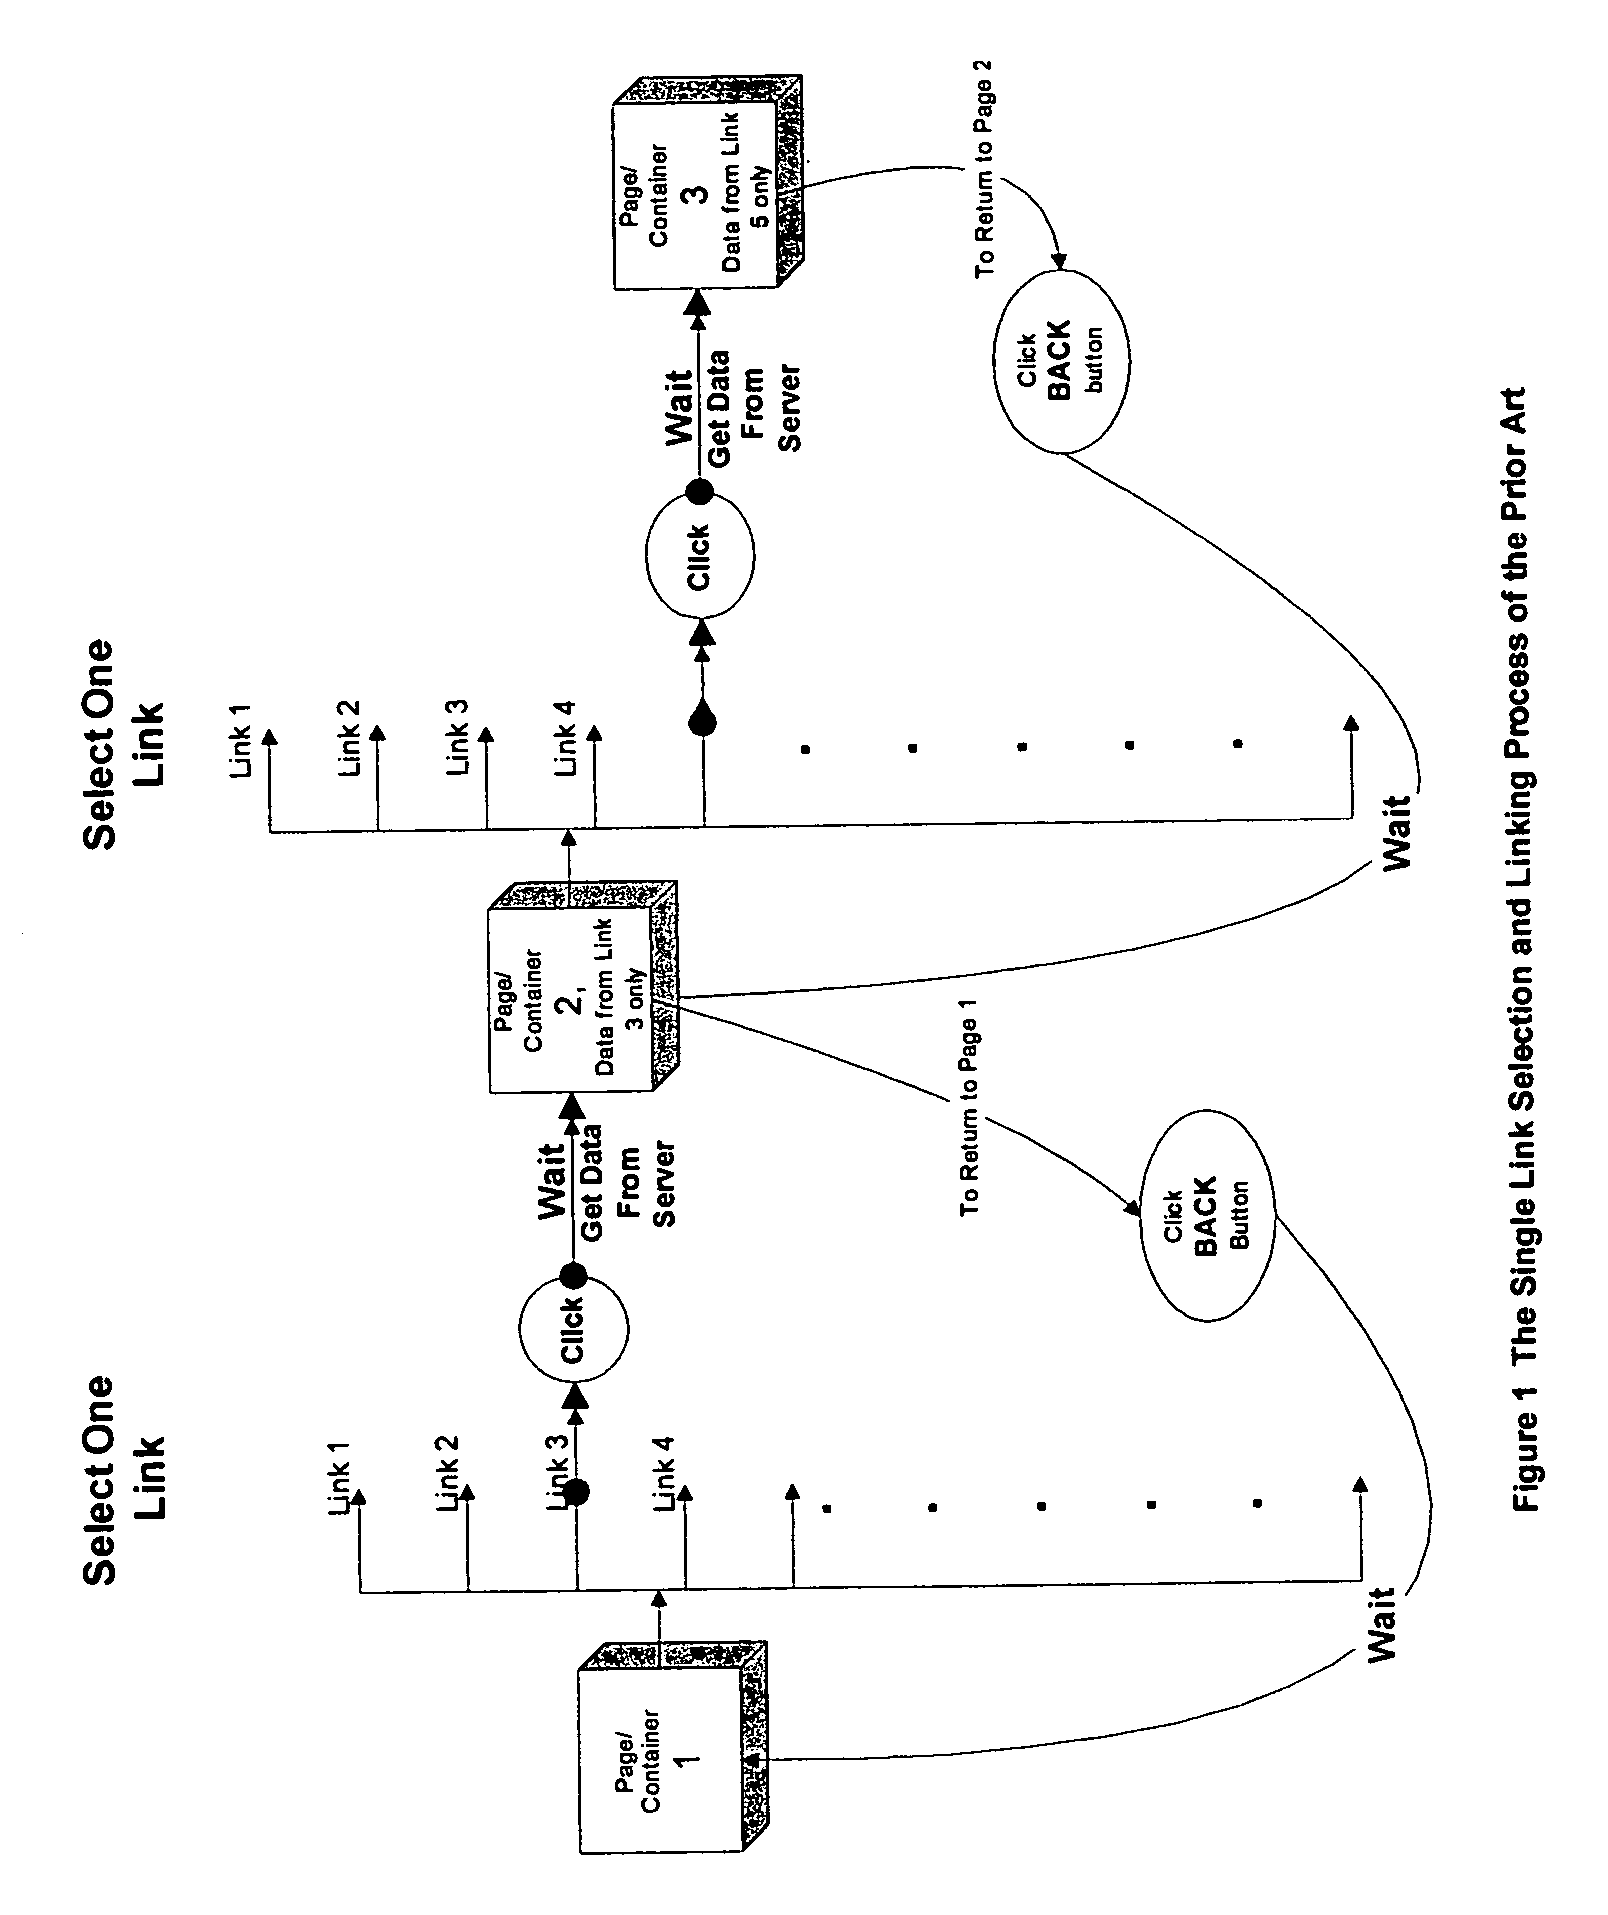 Dynamic array presentation and multiple selection of digitally stored objects and corresponding link tokens for simultaneous presentation